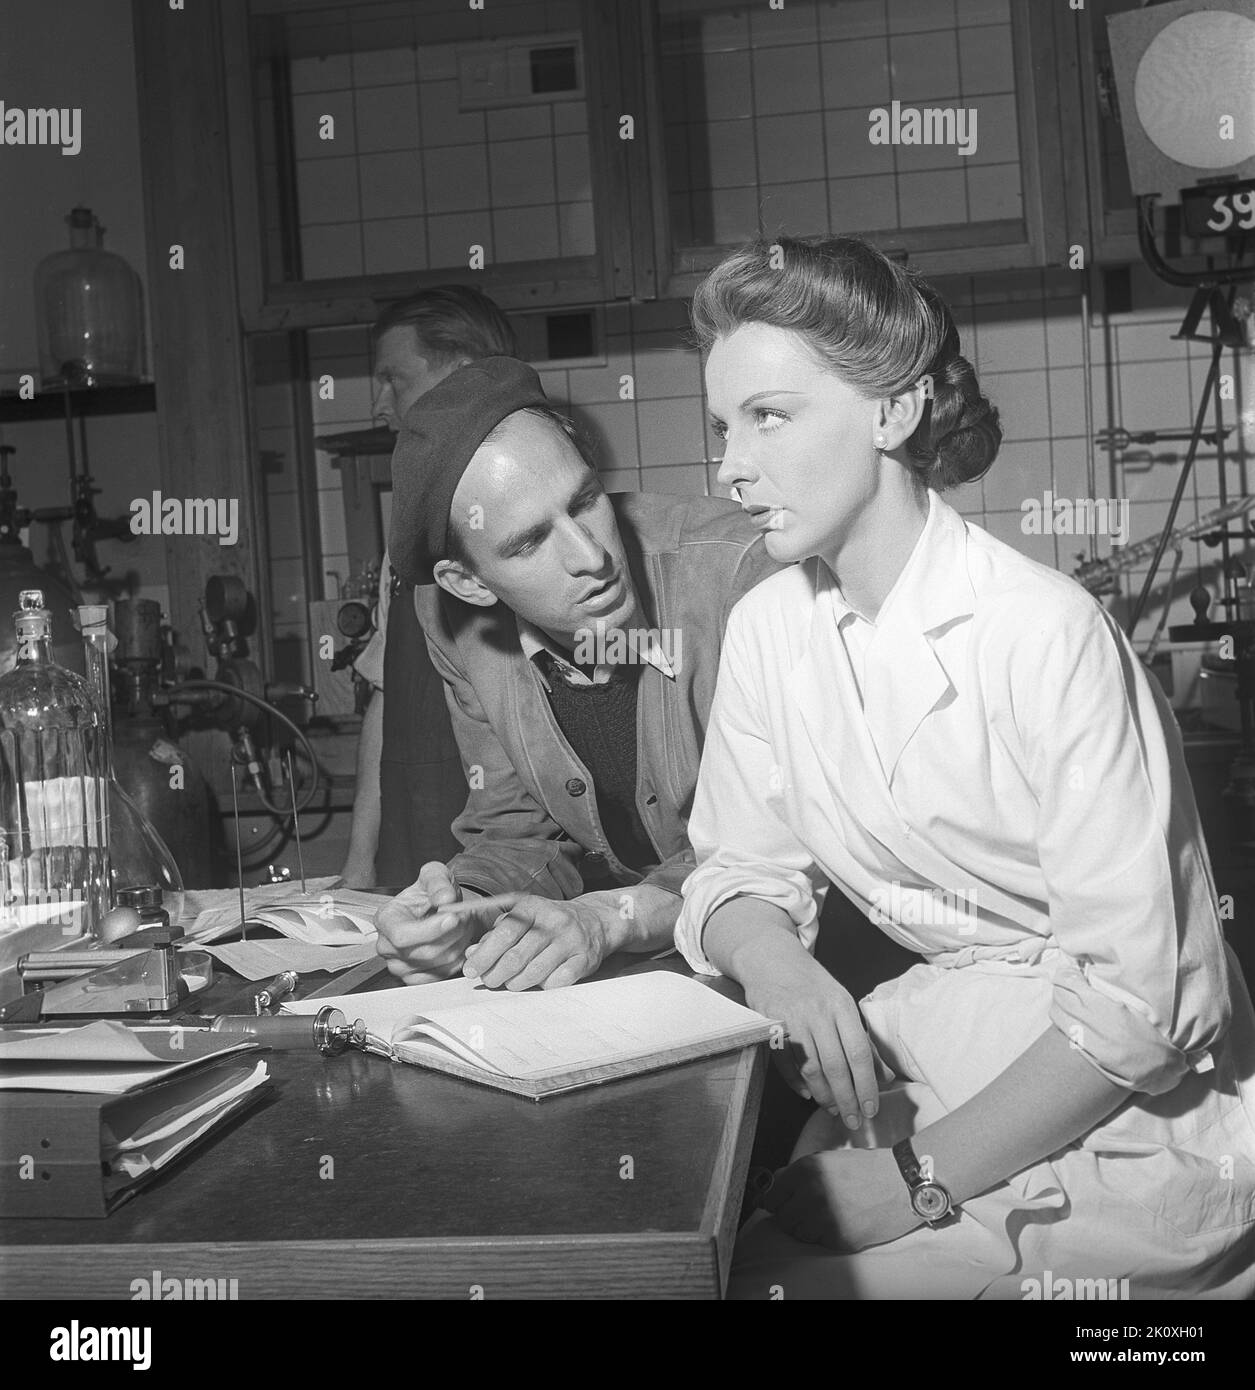 Ingmar Bergman. 1918-2007.  Swedish film director. Pictured here 1950 on the film set of the movie High Tension directing actress Signe Hasso. The film had premiere 1950. Kristoffersson ref AZ55-12 Stock Photo